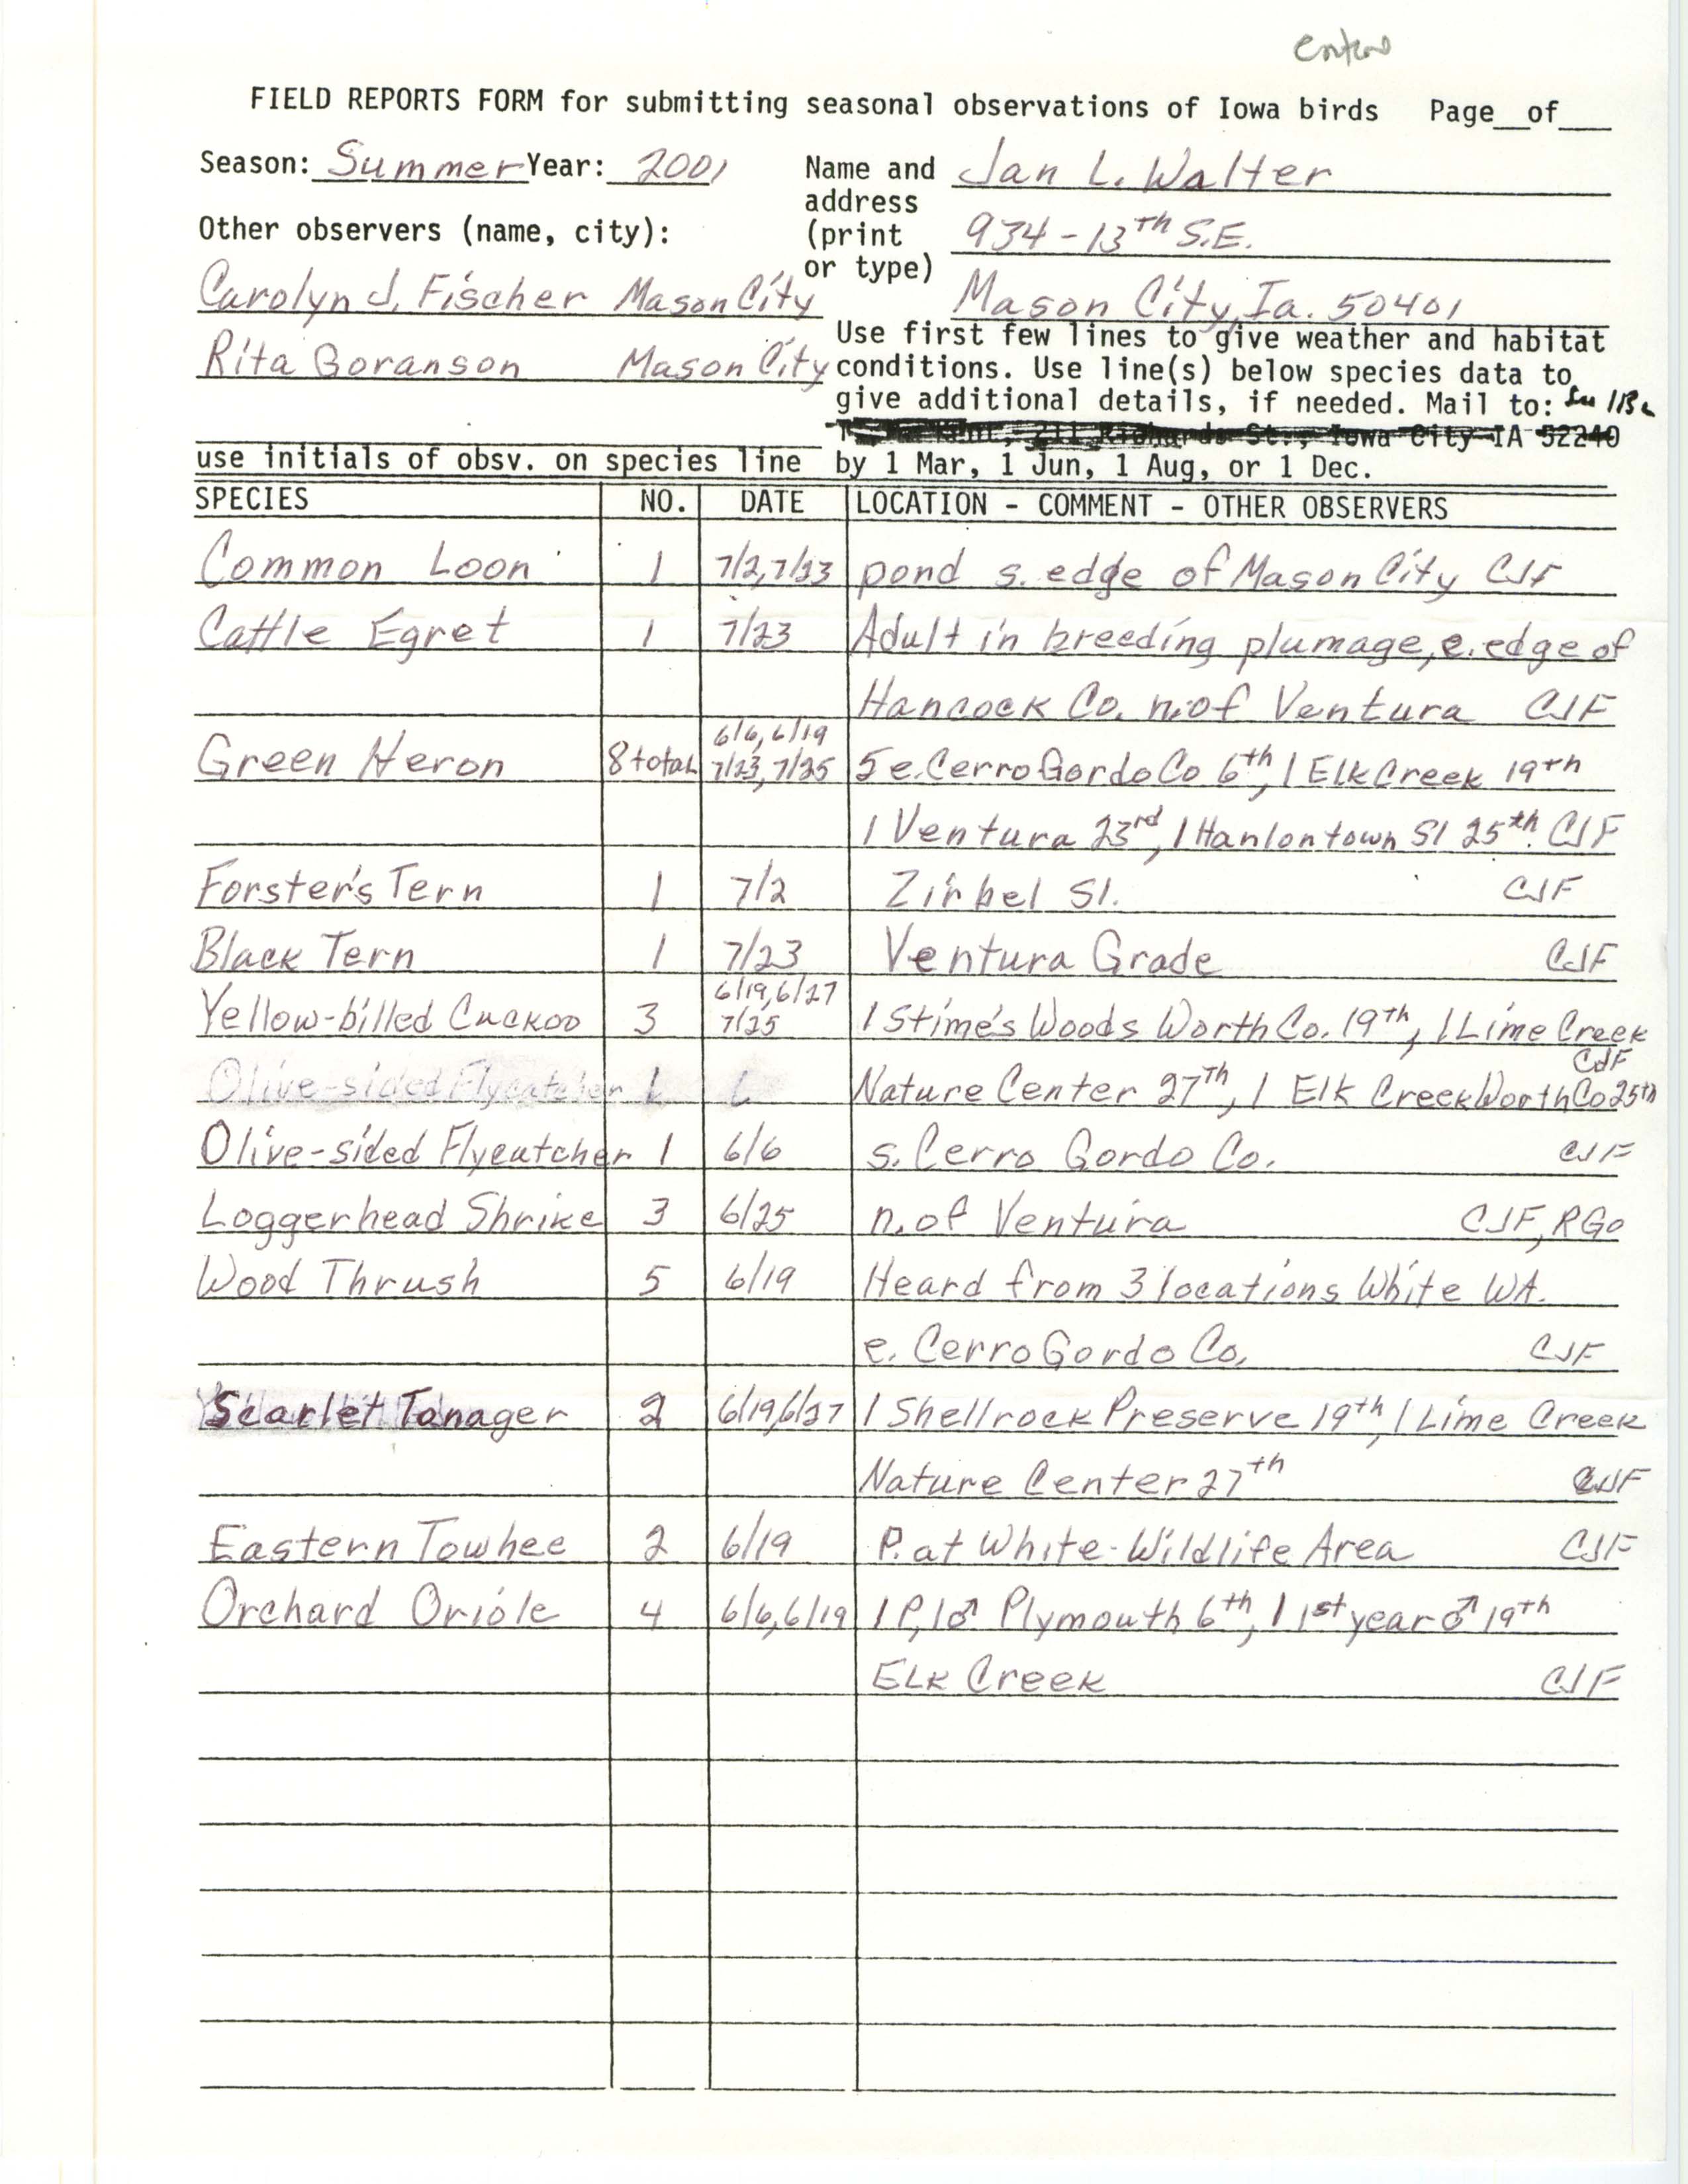 Field reports form for submitting seasonal observations of Iowa birds, Jan L. Walter, summer 2001